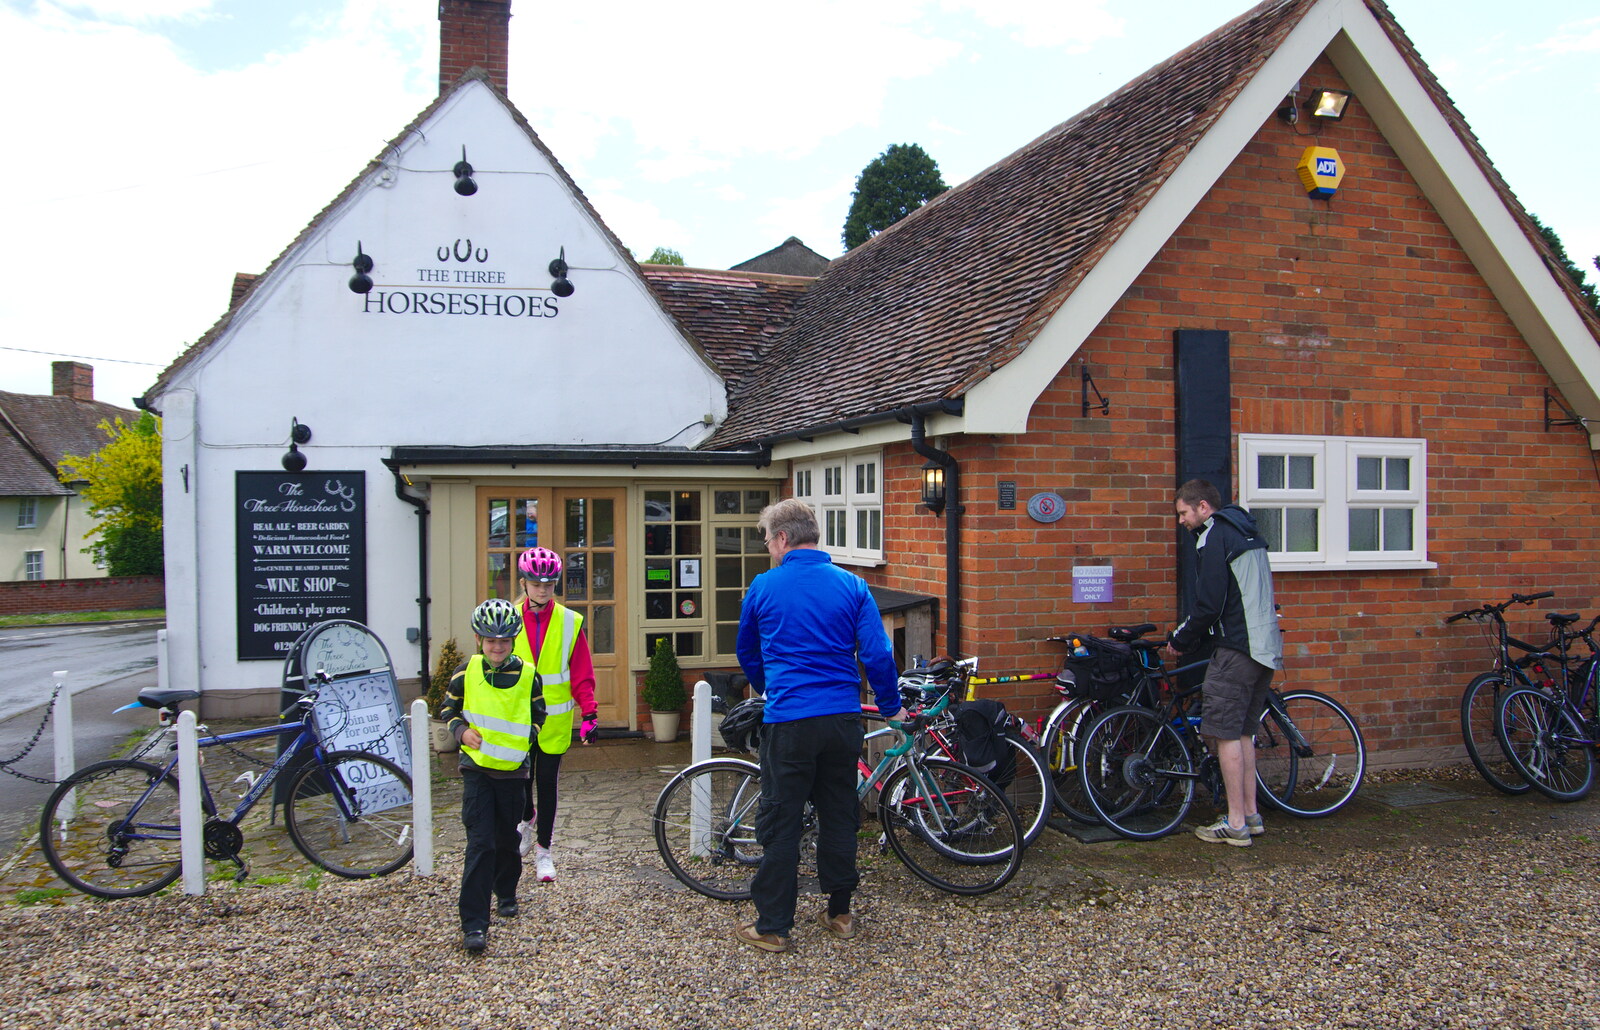 The BSCC Bike Ride 2019, Coggeshall, Essex - 11th May 2019: Fred comes out of the pub